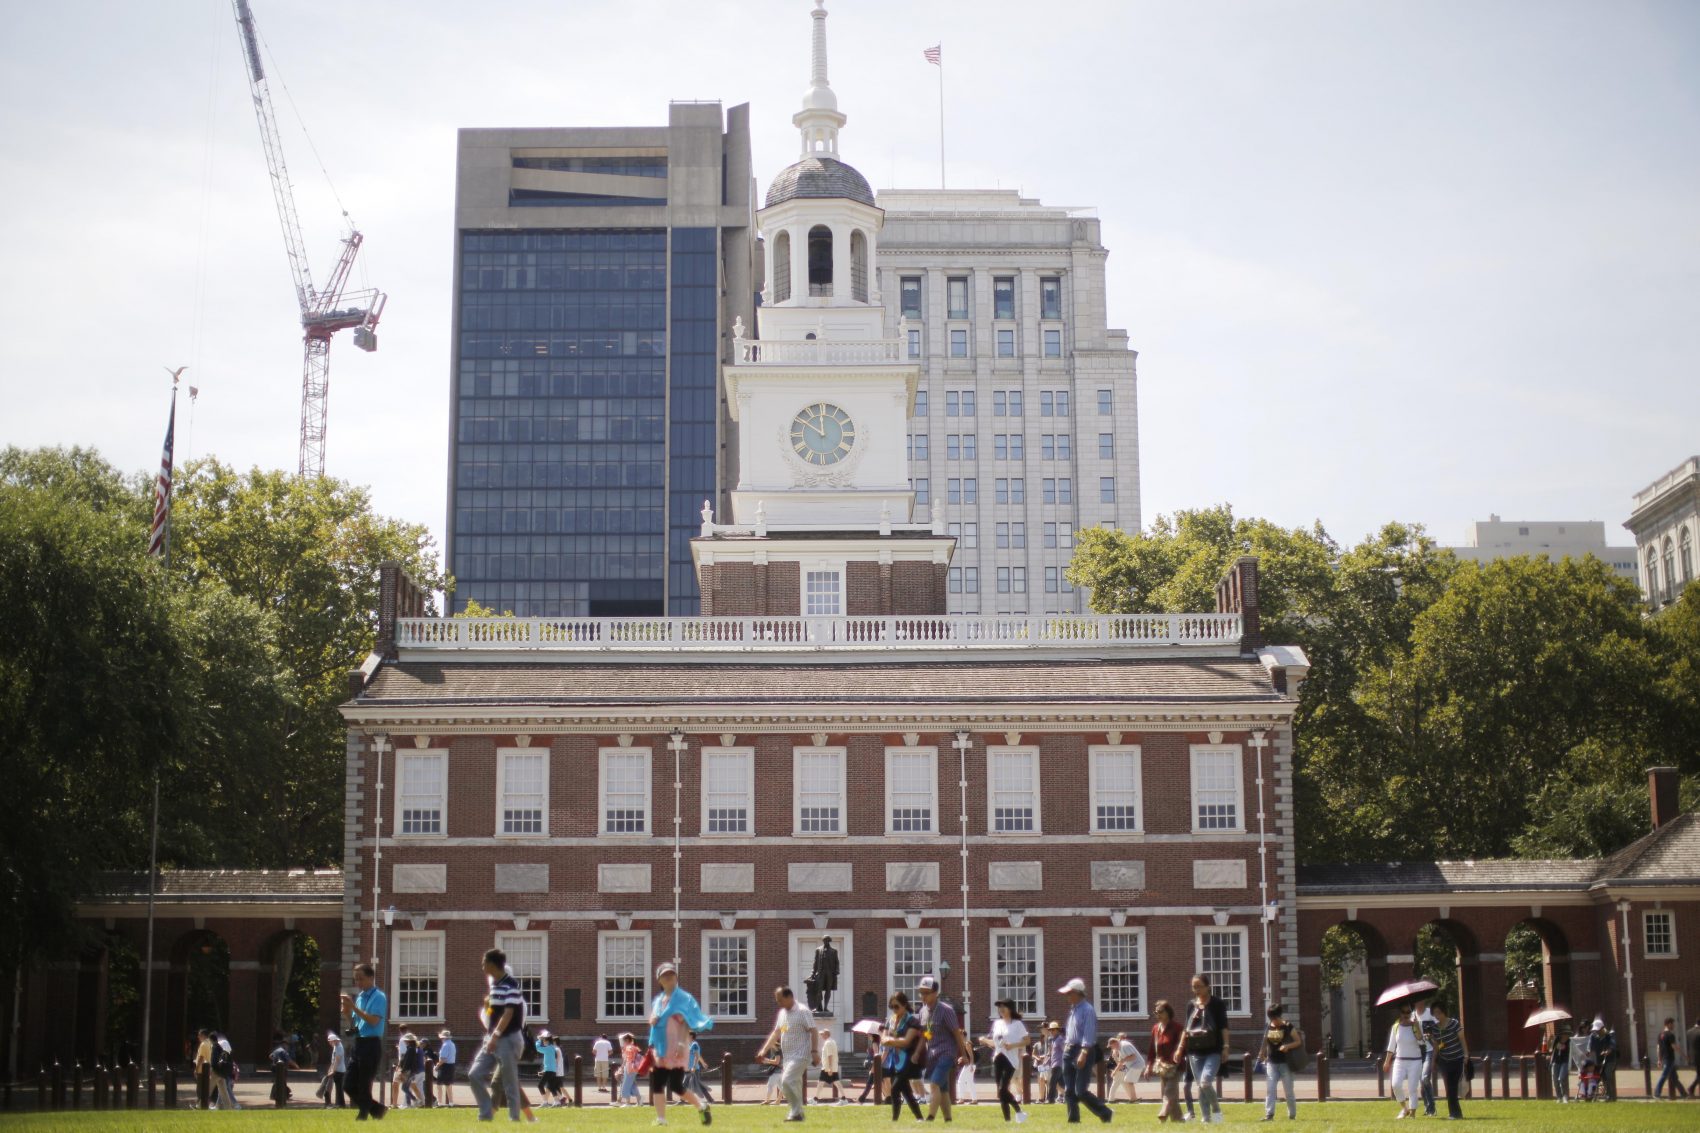 People move past Independence Hall at the Independence National Historical Park in Philadelphia, Thursday, Aug. 25, 2016. (Matt Rourke/AP)